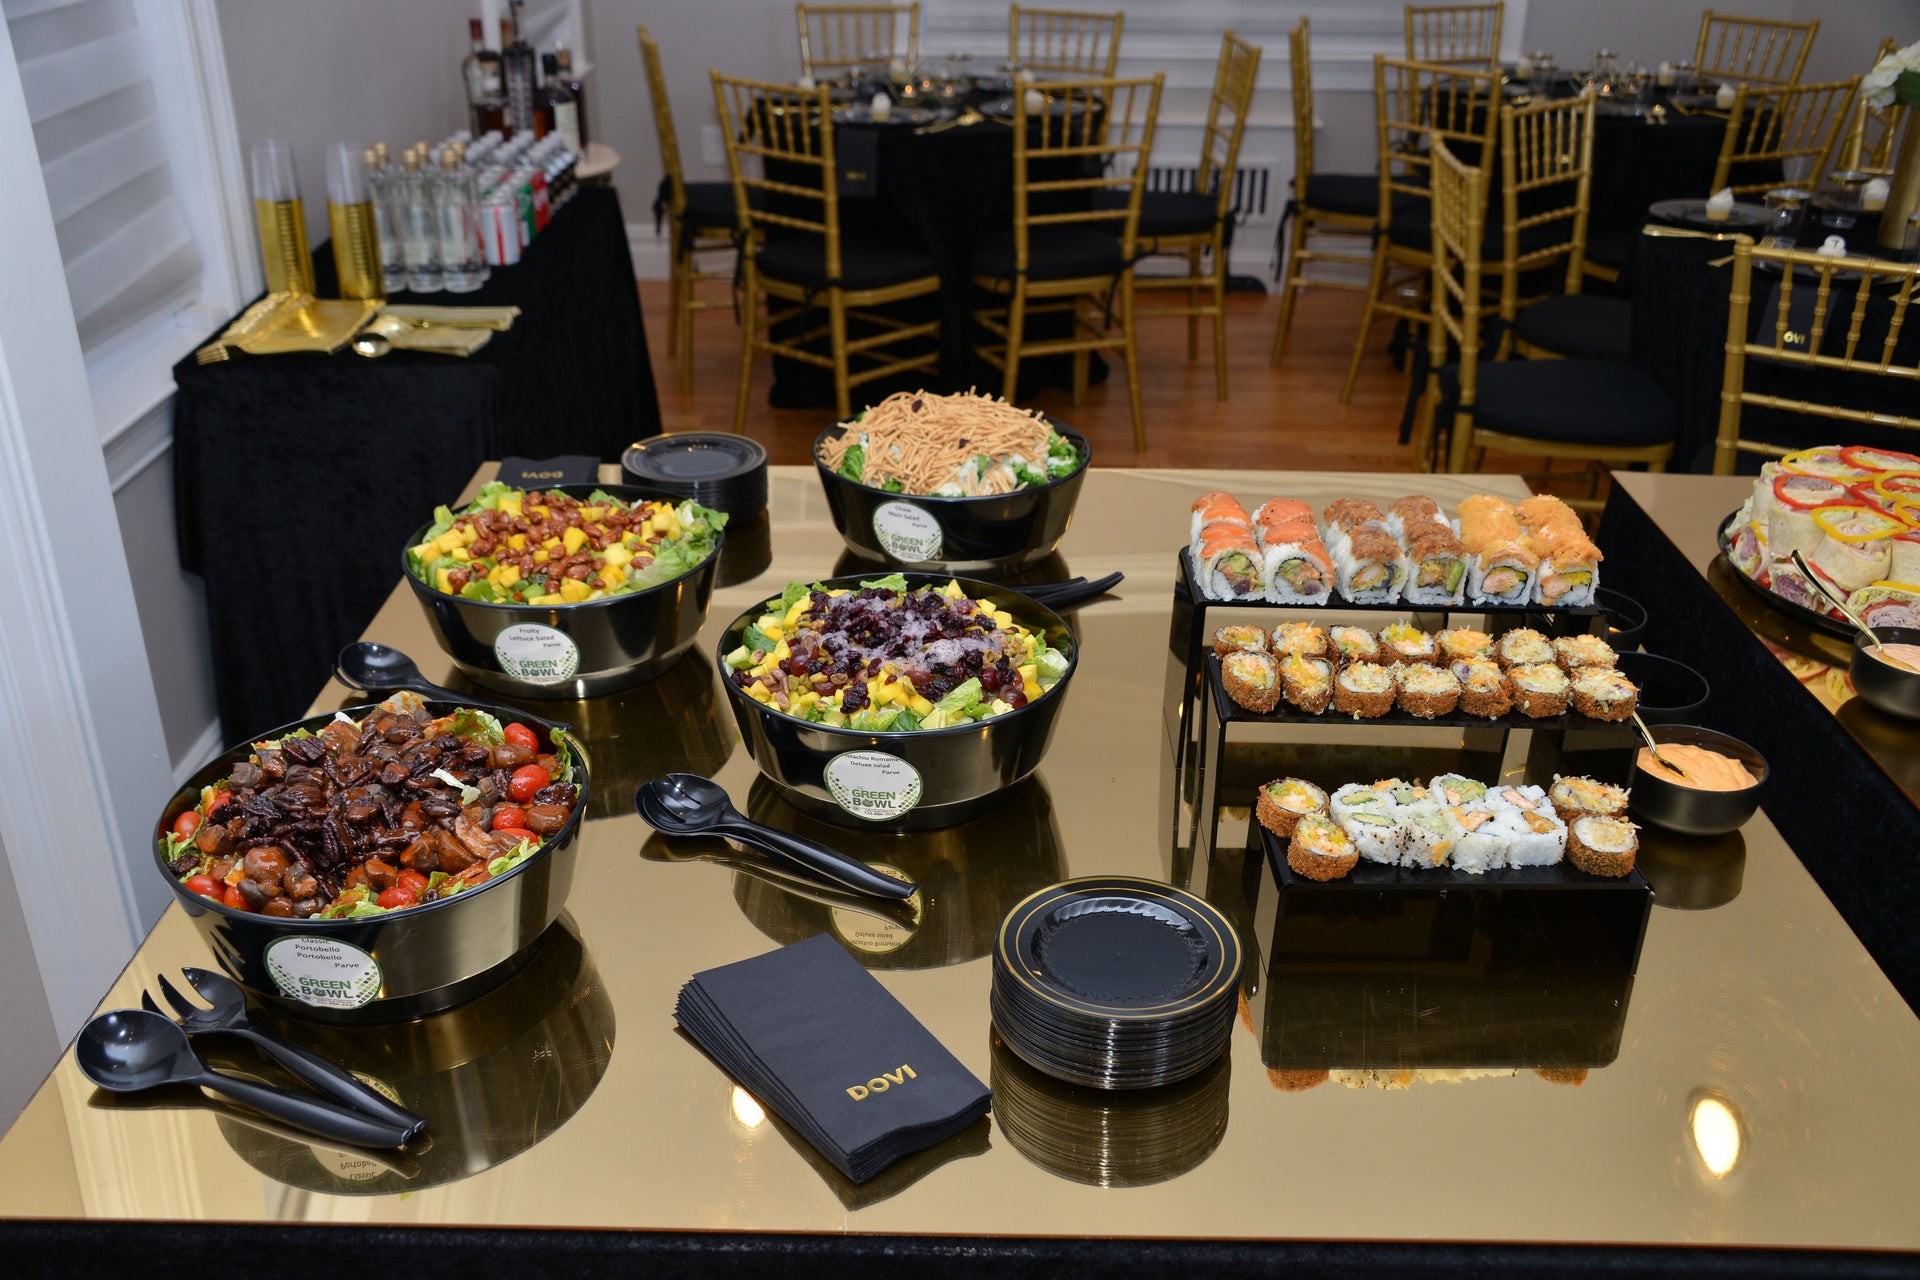 Plan a Catered Event Menu That Will Impress Your Guests